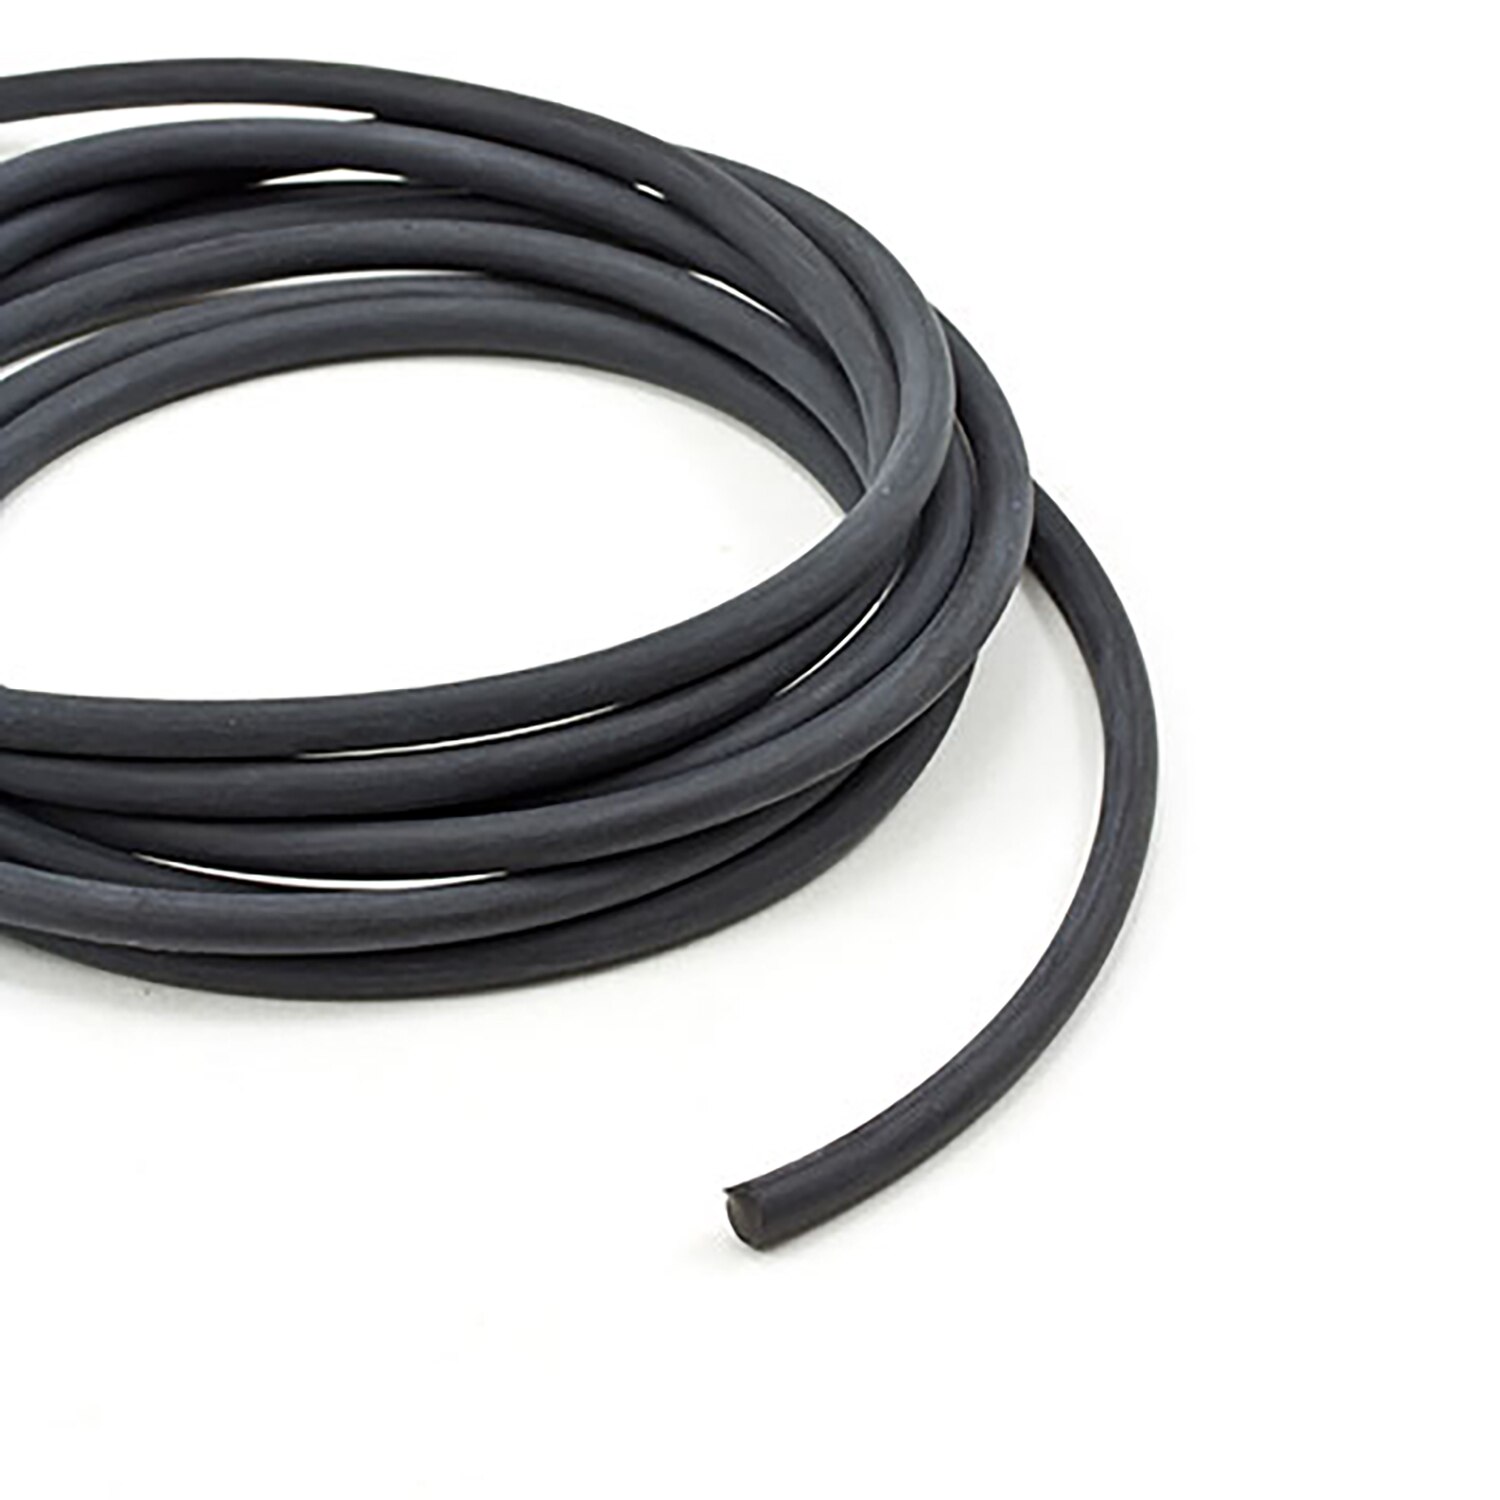 Synthetic Rubber (EPDM) Rope 3/8 Coil 933037503 (800 feet)